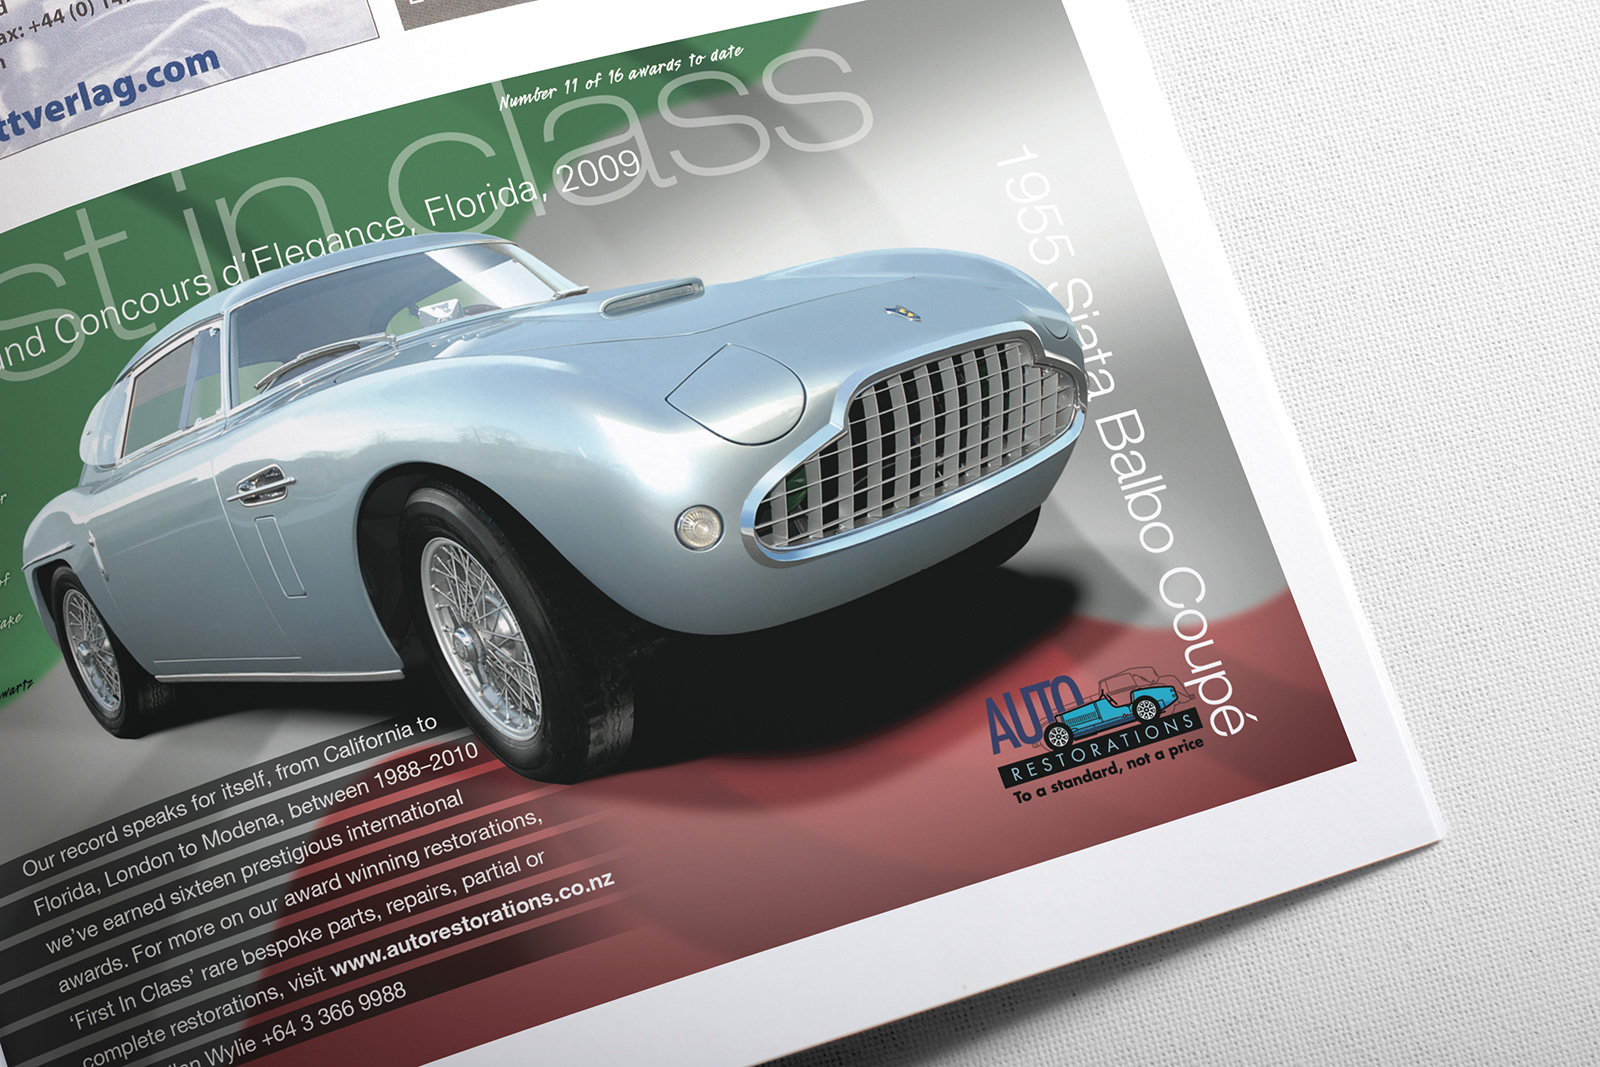 Siata Balbo half page advertisement for Auto Restorations in Classic Car enthusiasts magazine 2010. Second in a campaign of ads. The theme of the campaign is to dedicate each ad to one of their 16 international award winning restorations.